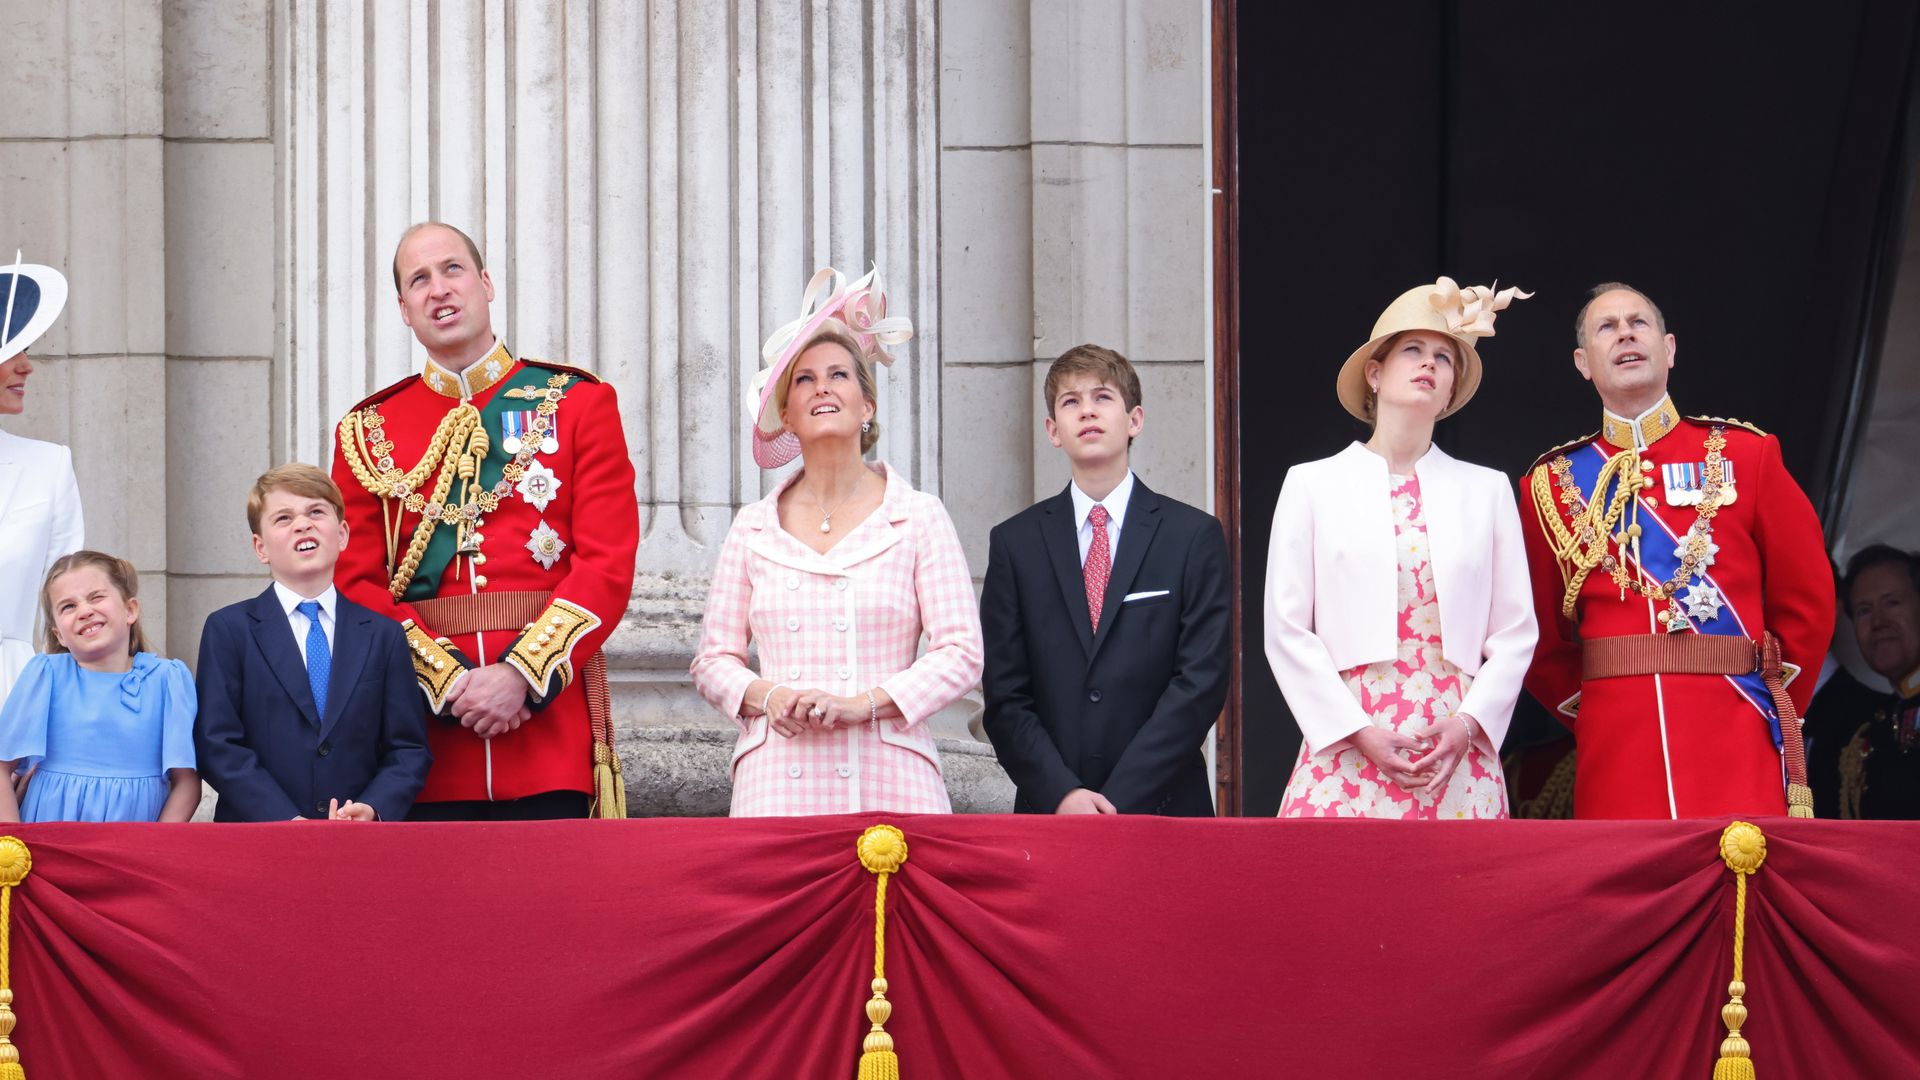 Prince George on balcony at Trooping the Colour 2022